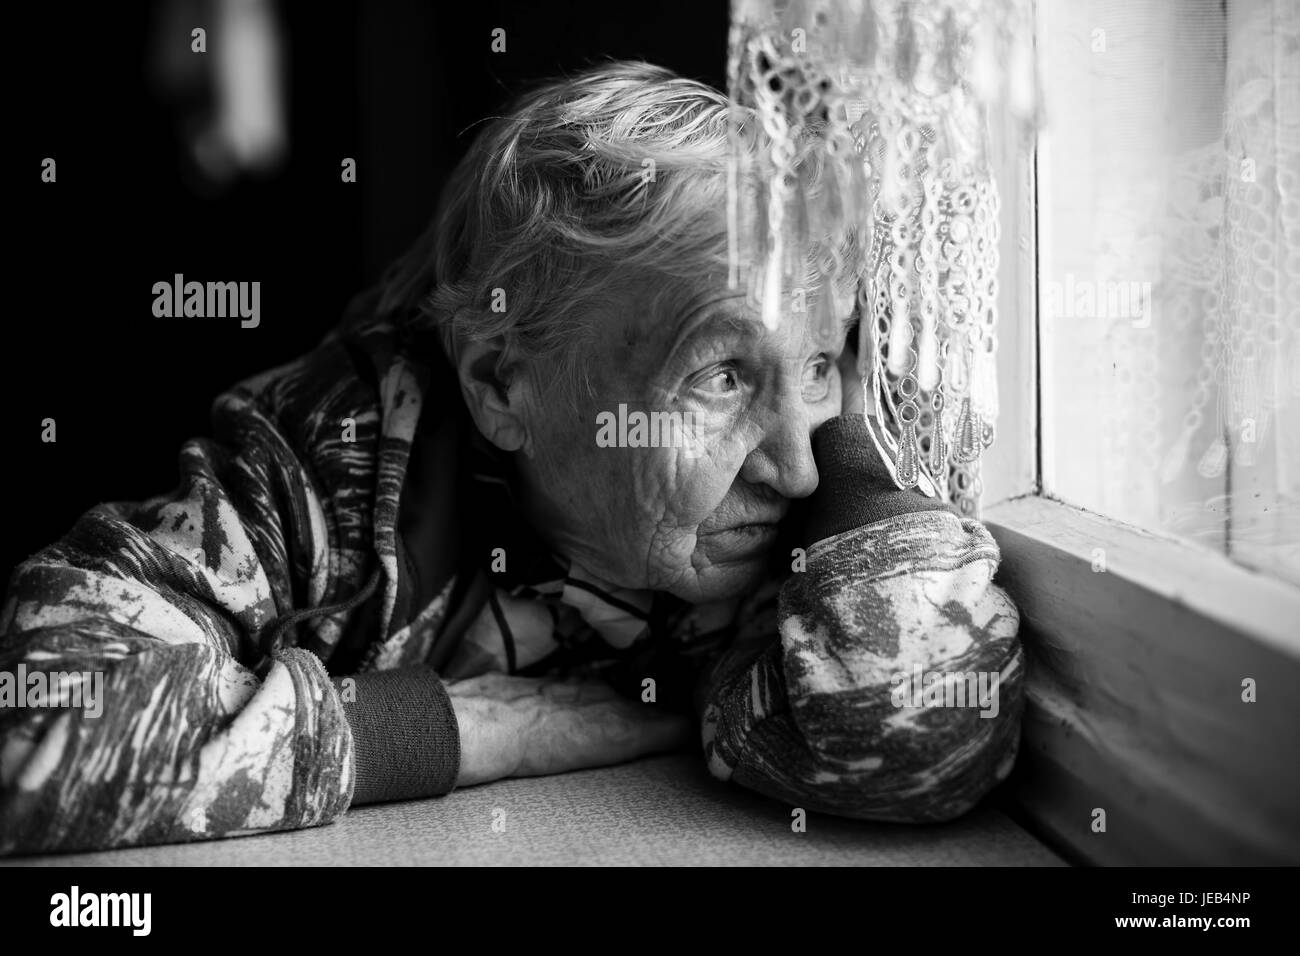 An elderly woman looks wistfully out the window. Black-and-white photo. Stock Photo